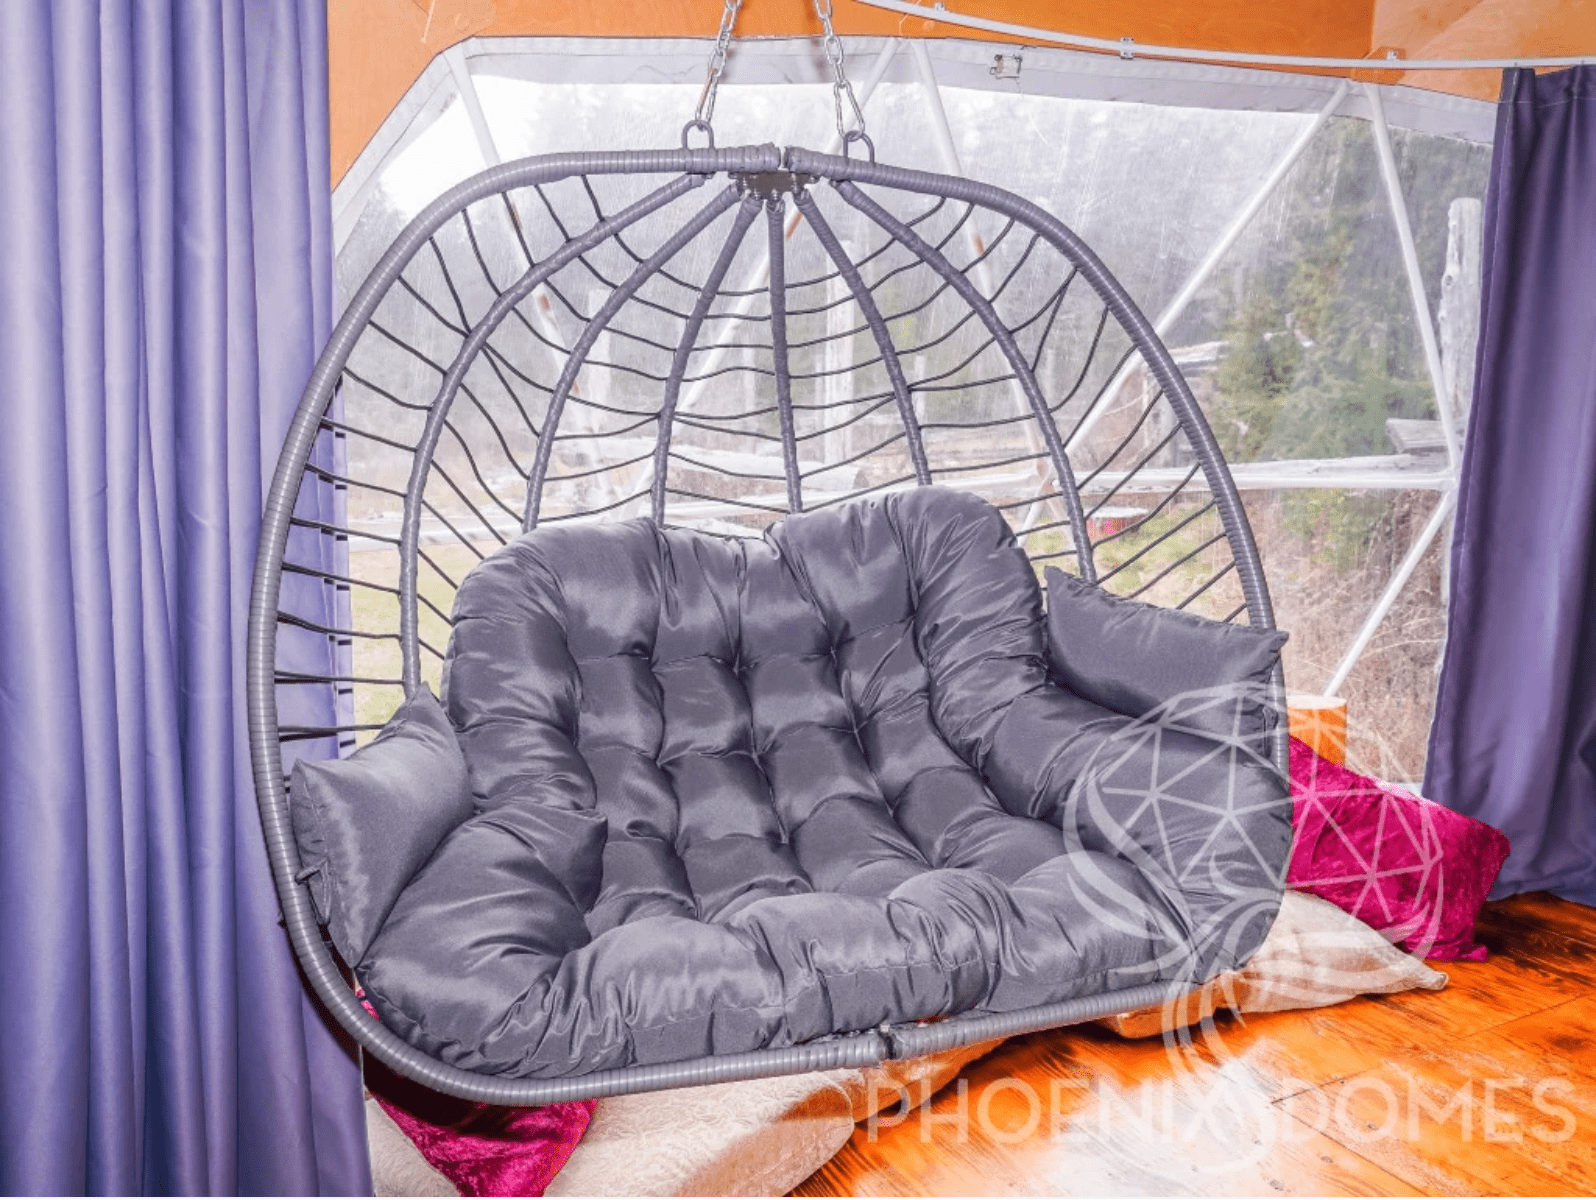 PHOENIX DOMES Basket Chair - Dark Grey - Single Hanging Chair for Phoenix Domes Geodesic Dome